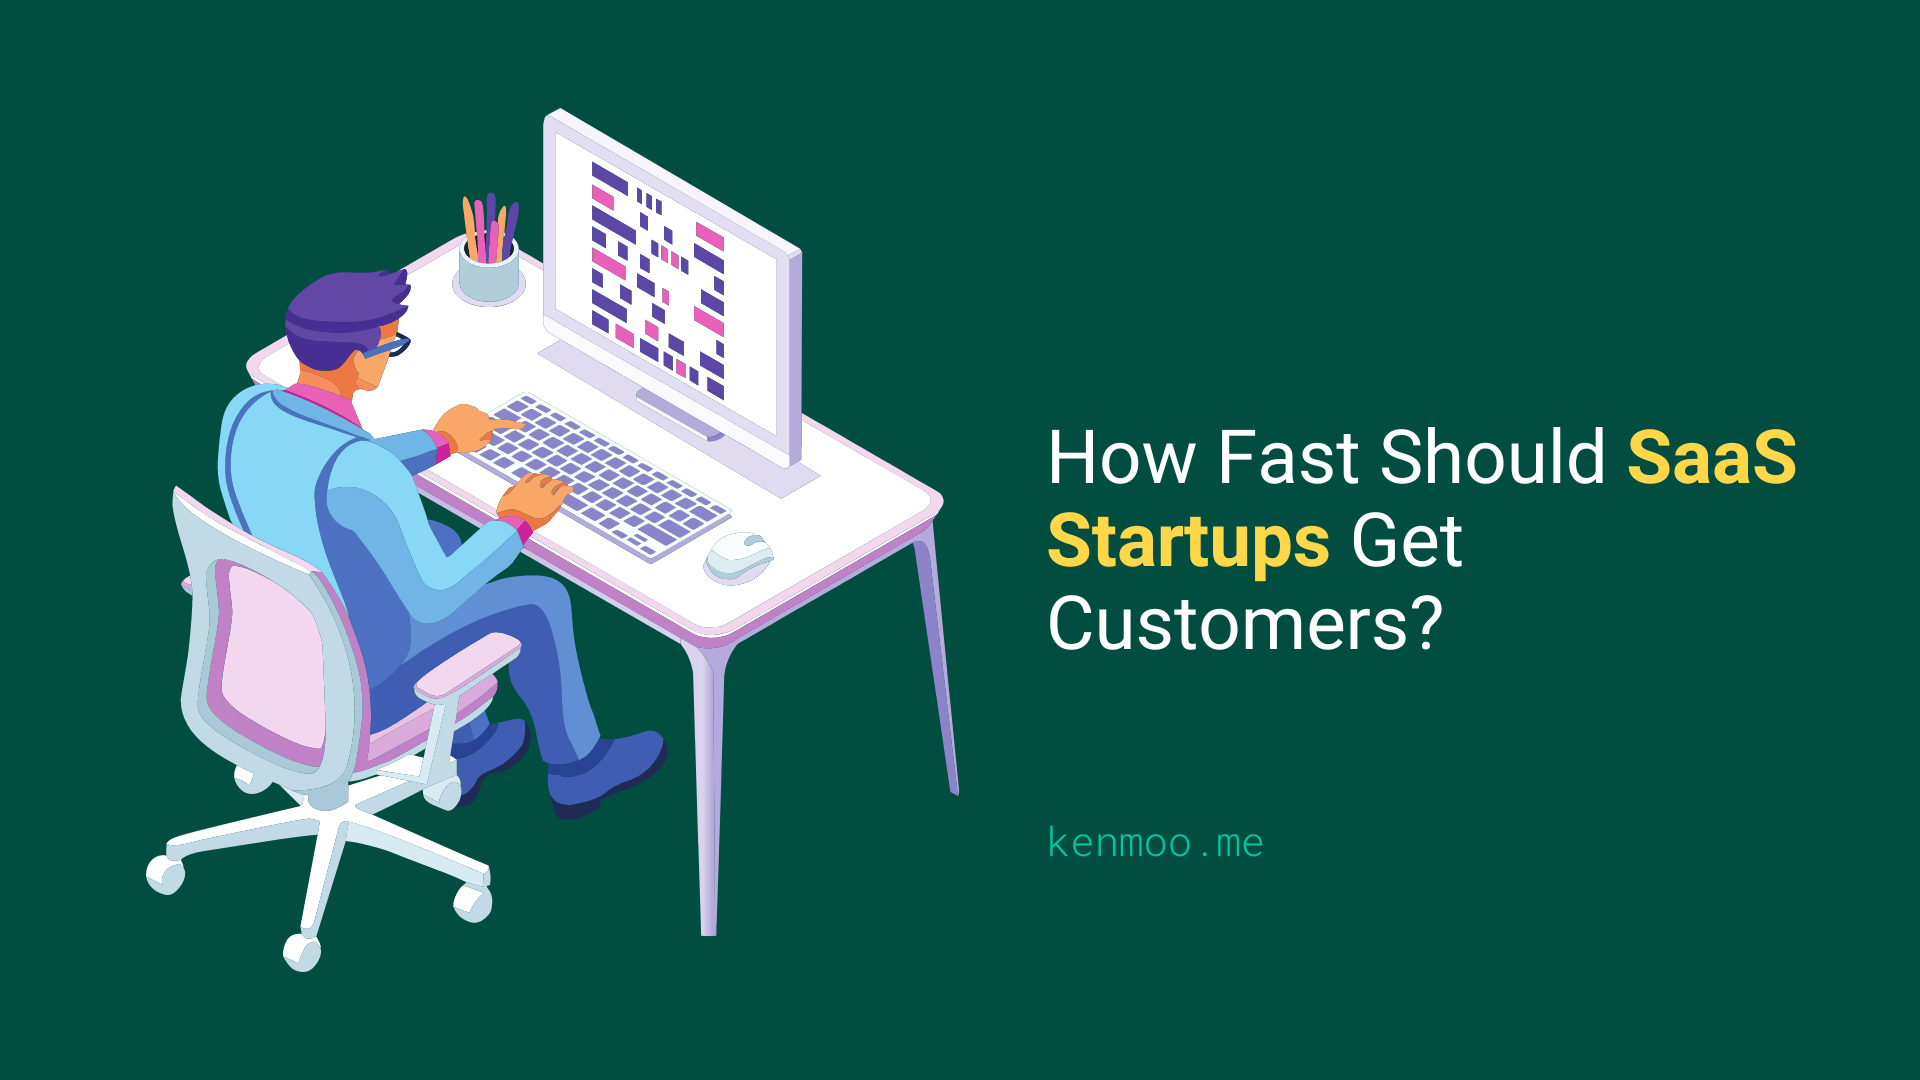 How Fast Should SaaS Startups Get Customers?